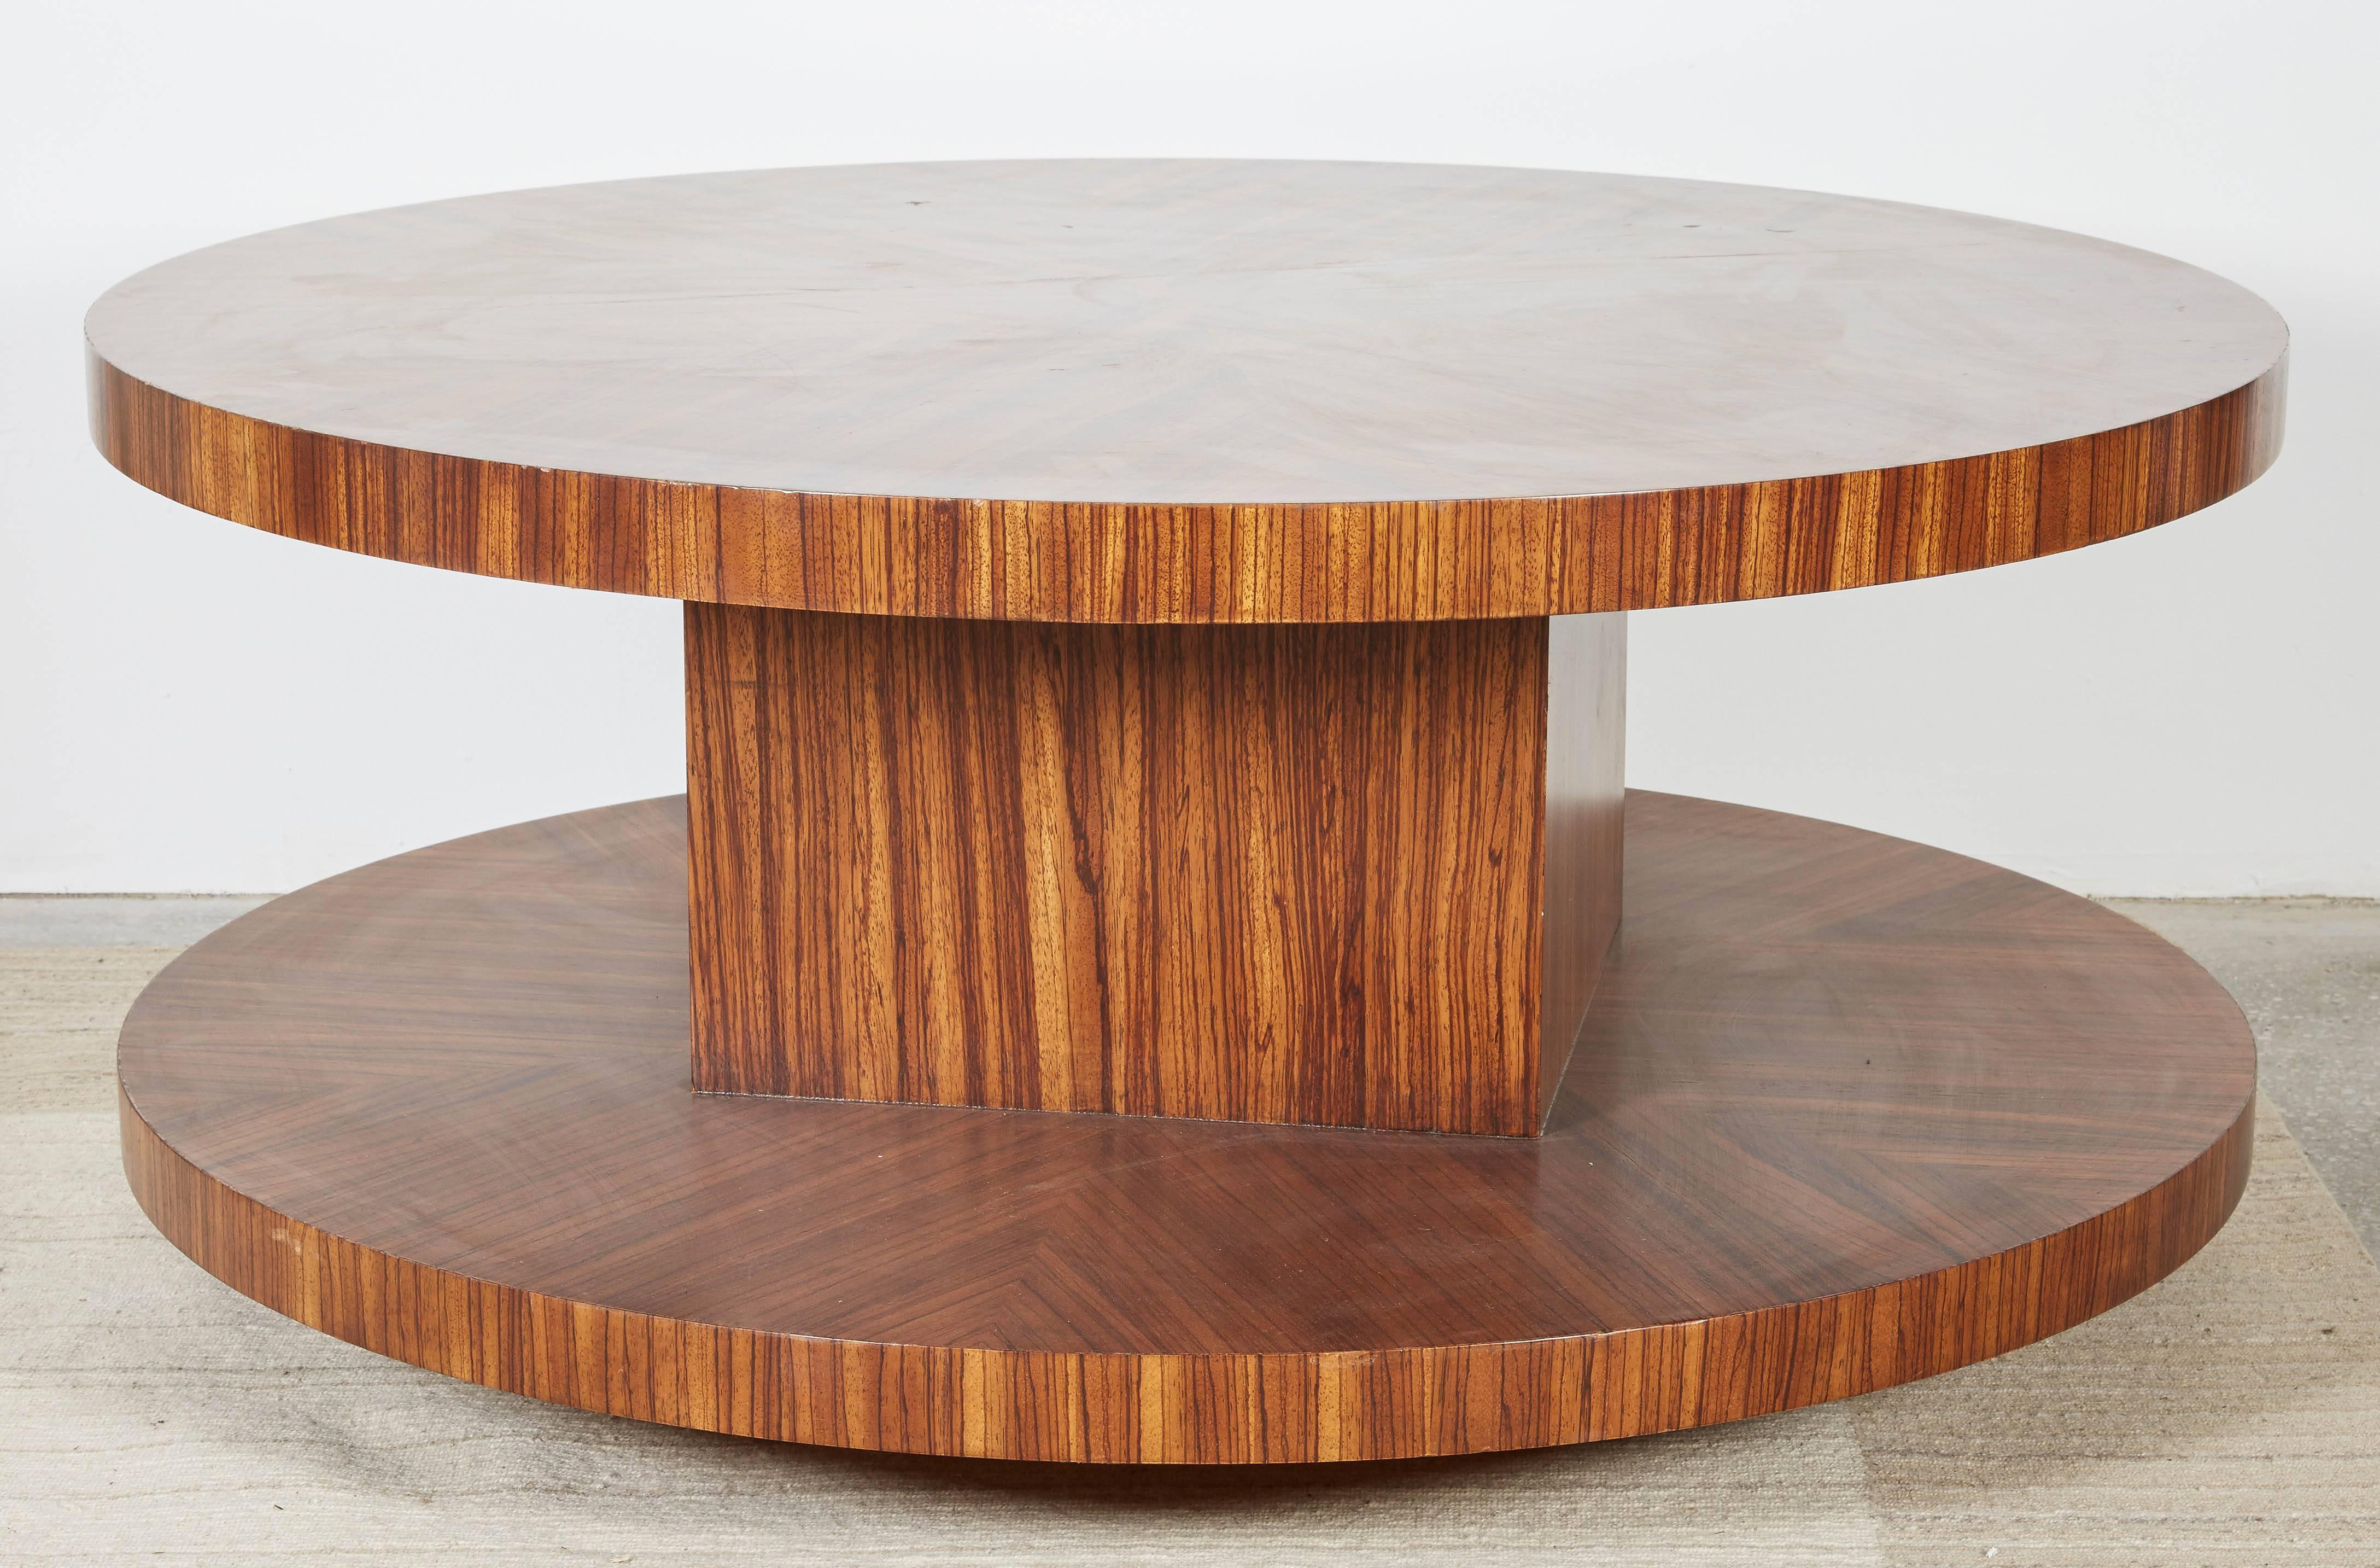 Modernist coffee table in zebrawood veneer with rotating top. The finish is rich and luminous and features a radial veneer layout. Minor scratches and wear consistent with the age and use of the piece.                            